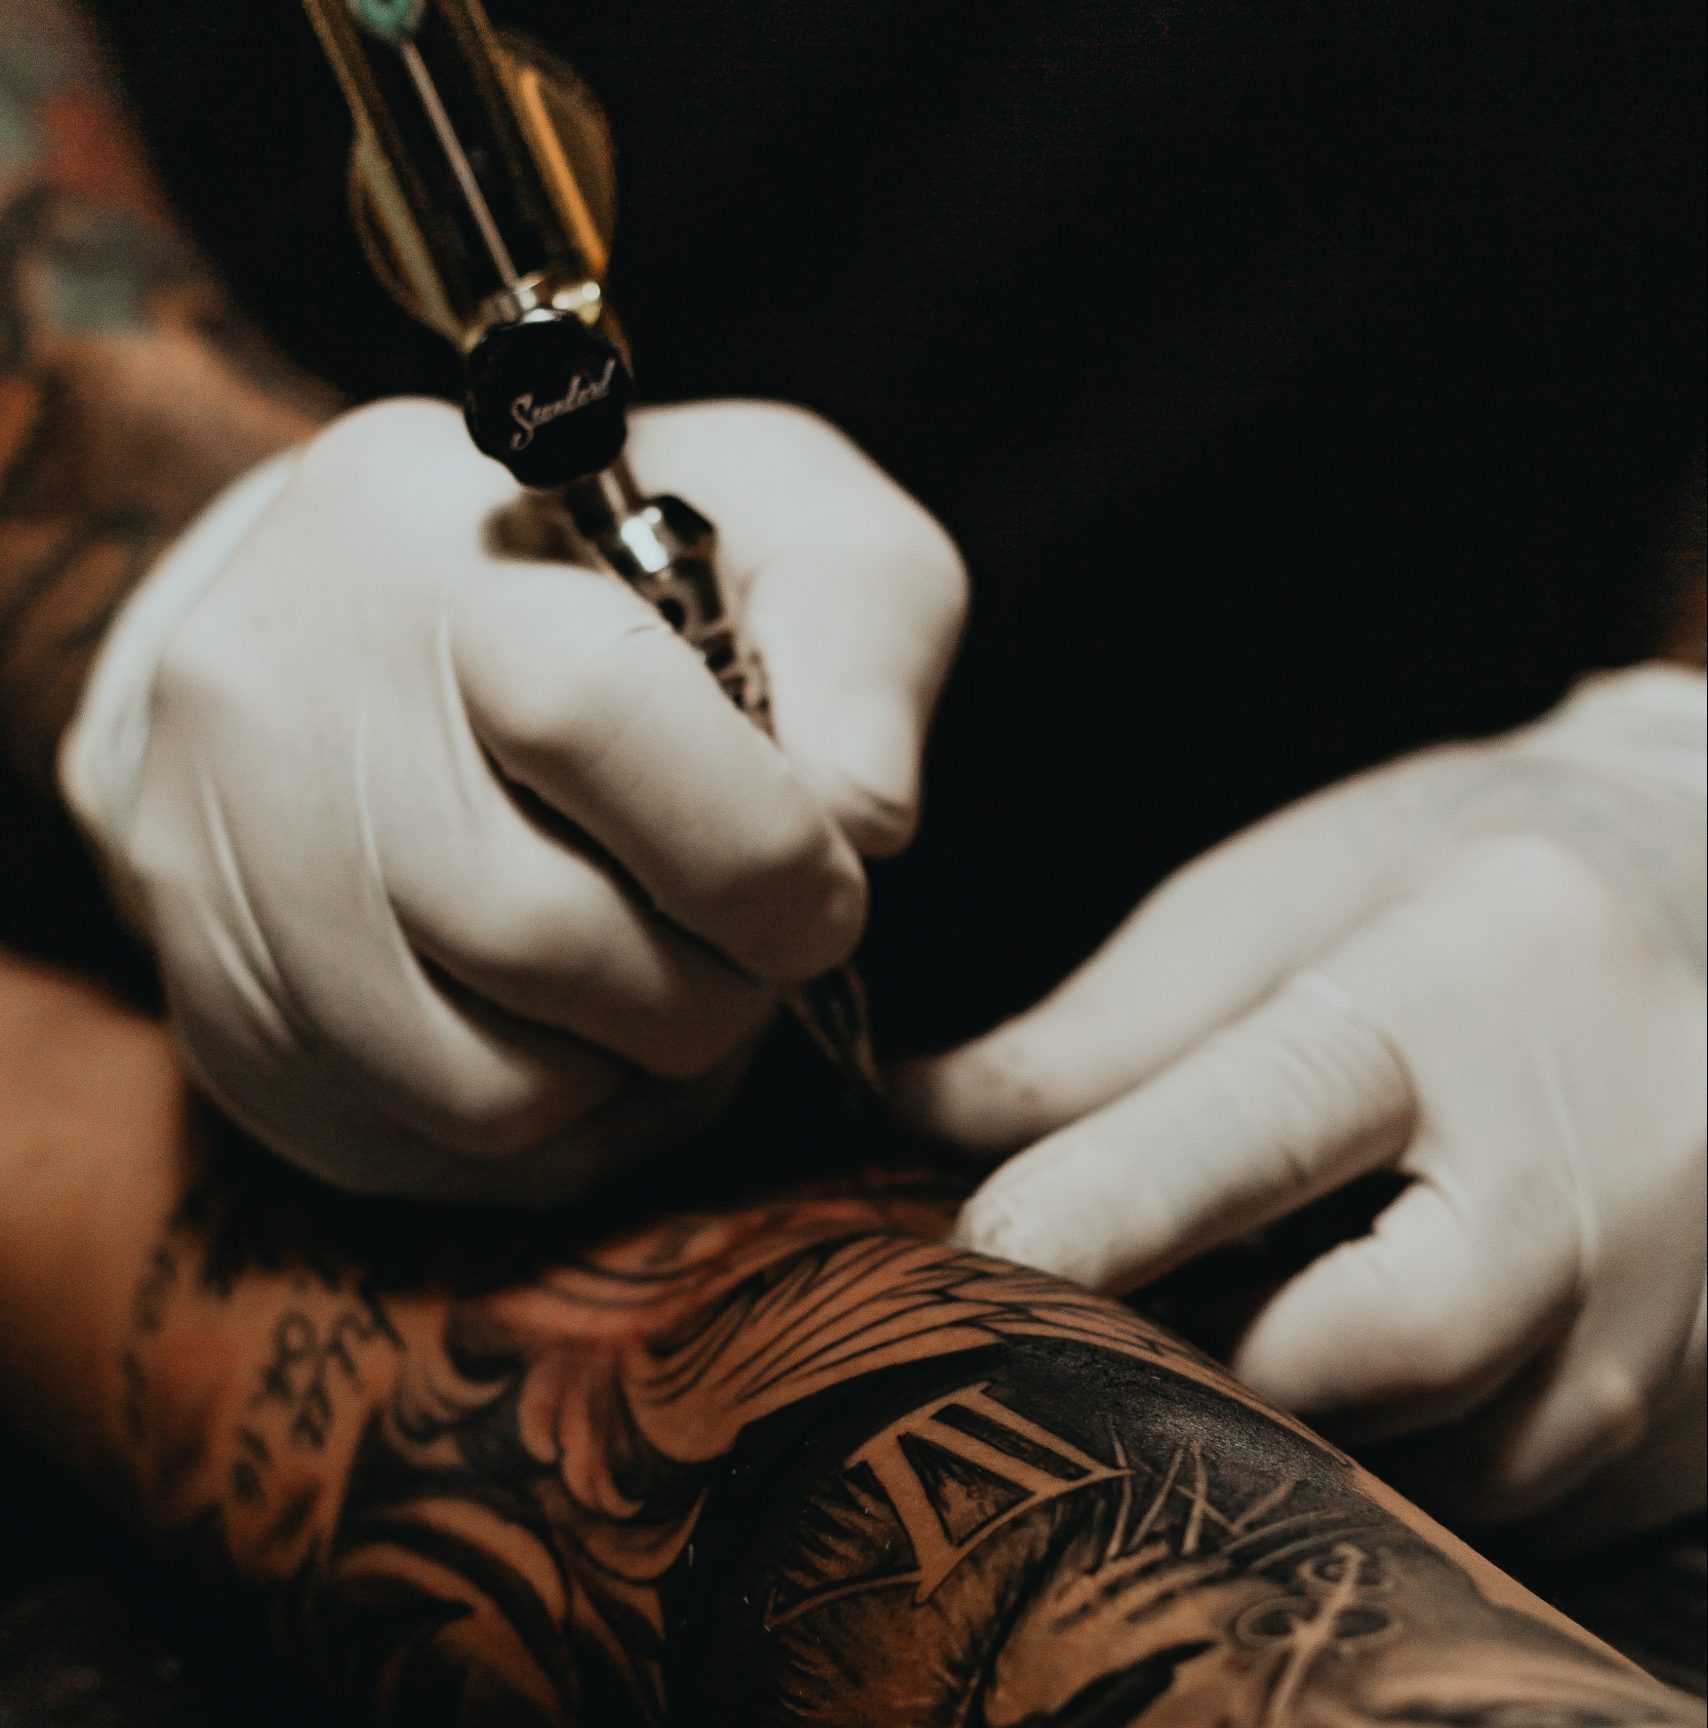 Which is the best tattoo shop for a Shiva tattoo in Ahmedabad? - Quora